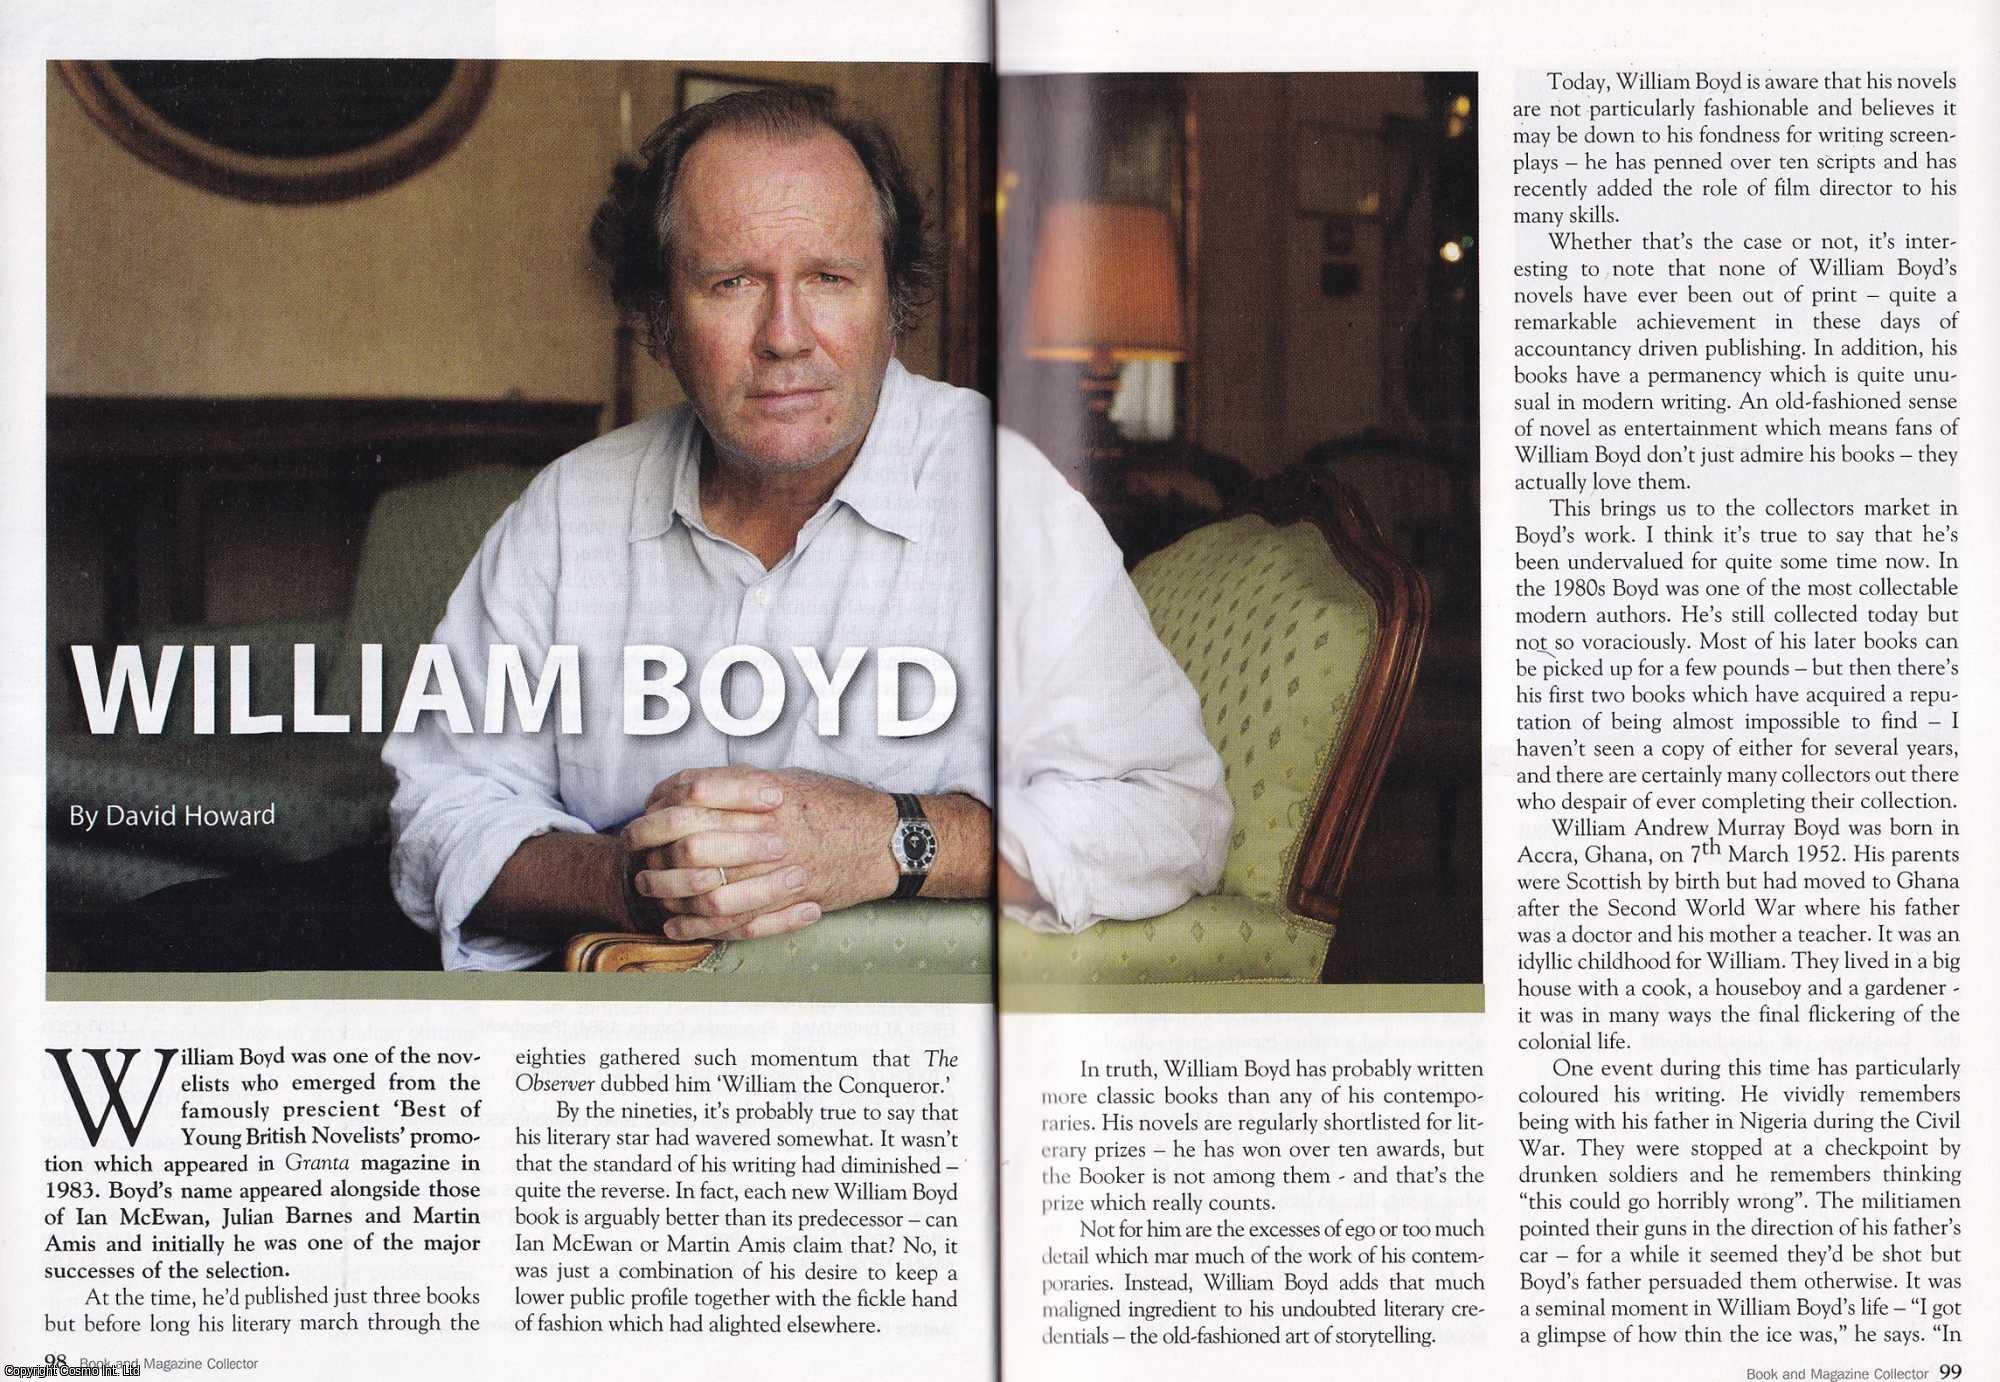 David Howard - William Boyd. This is an original article separated from an issue of The Book & Magazine Collector publication, 2008.